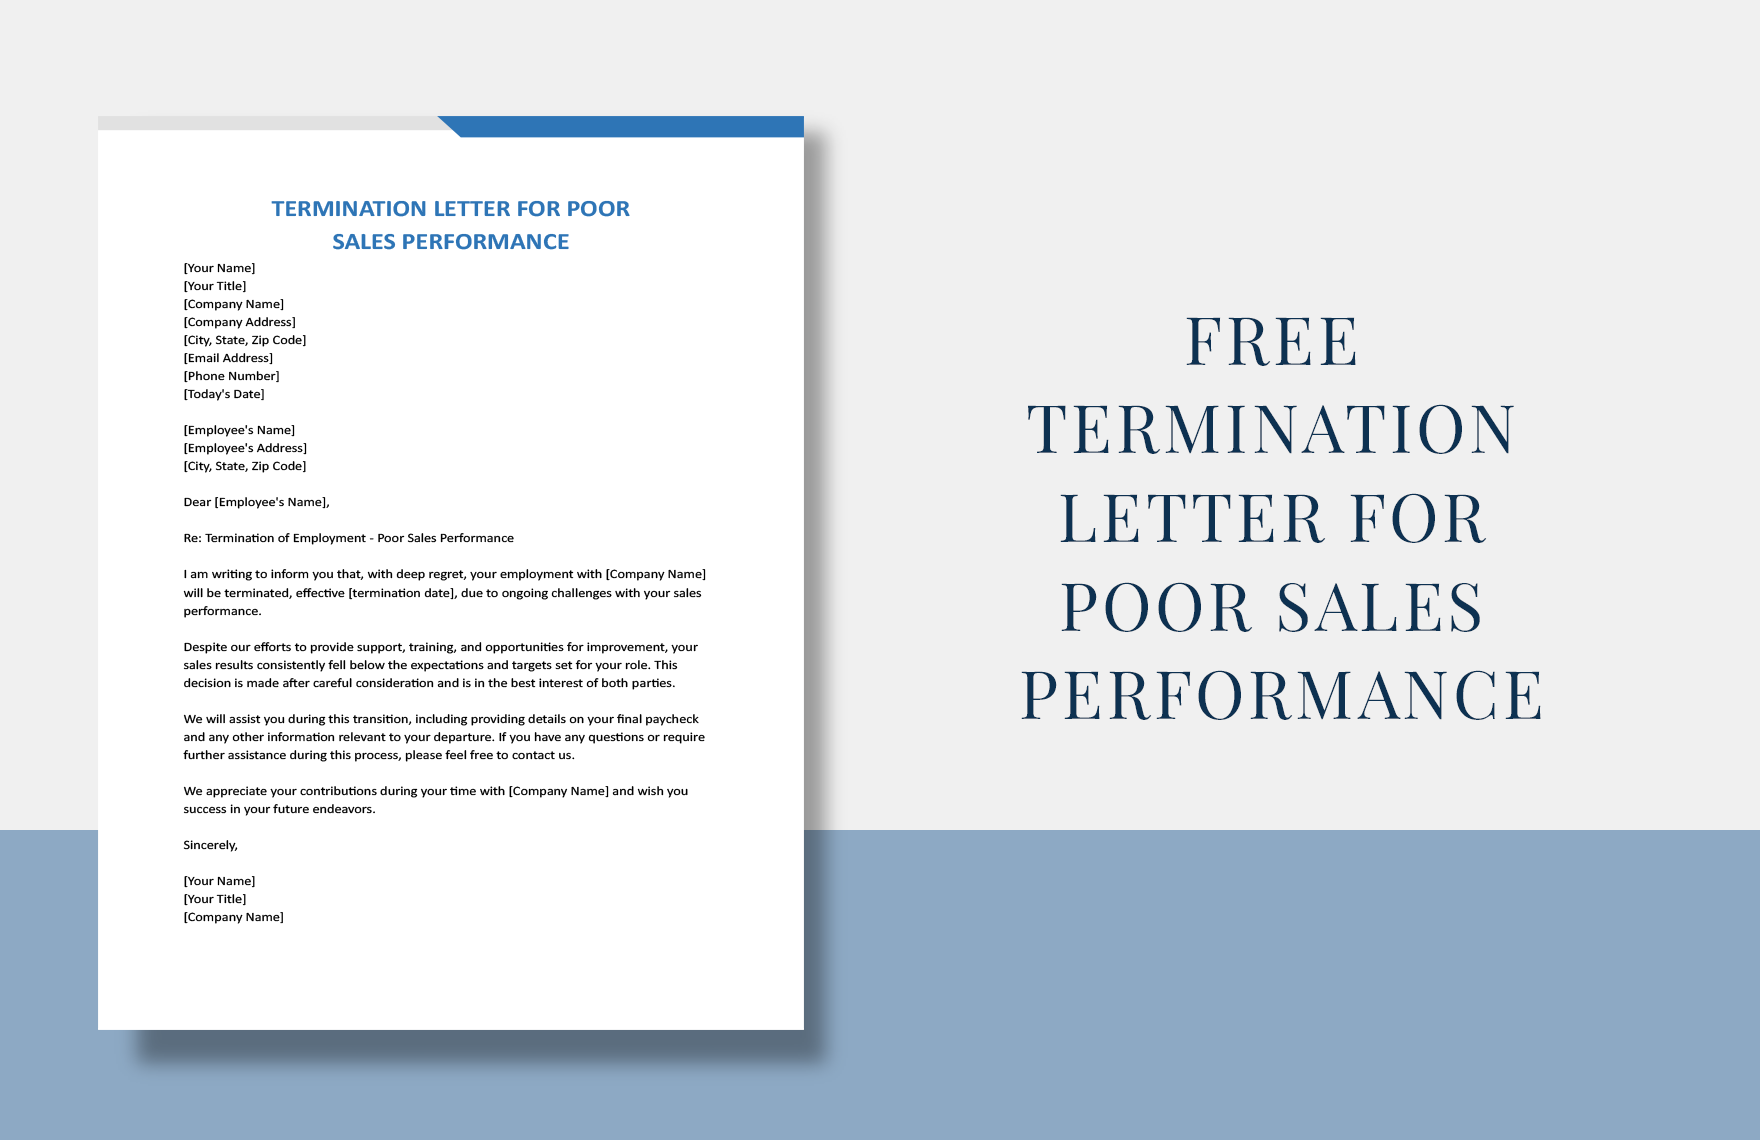 termination-letter-for-poor-sales-performance